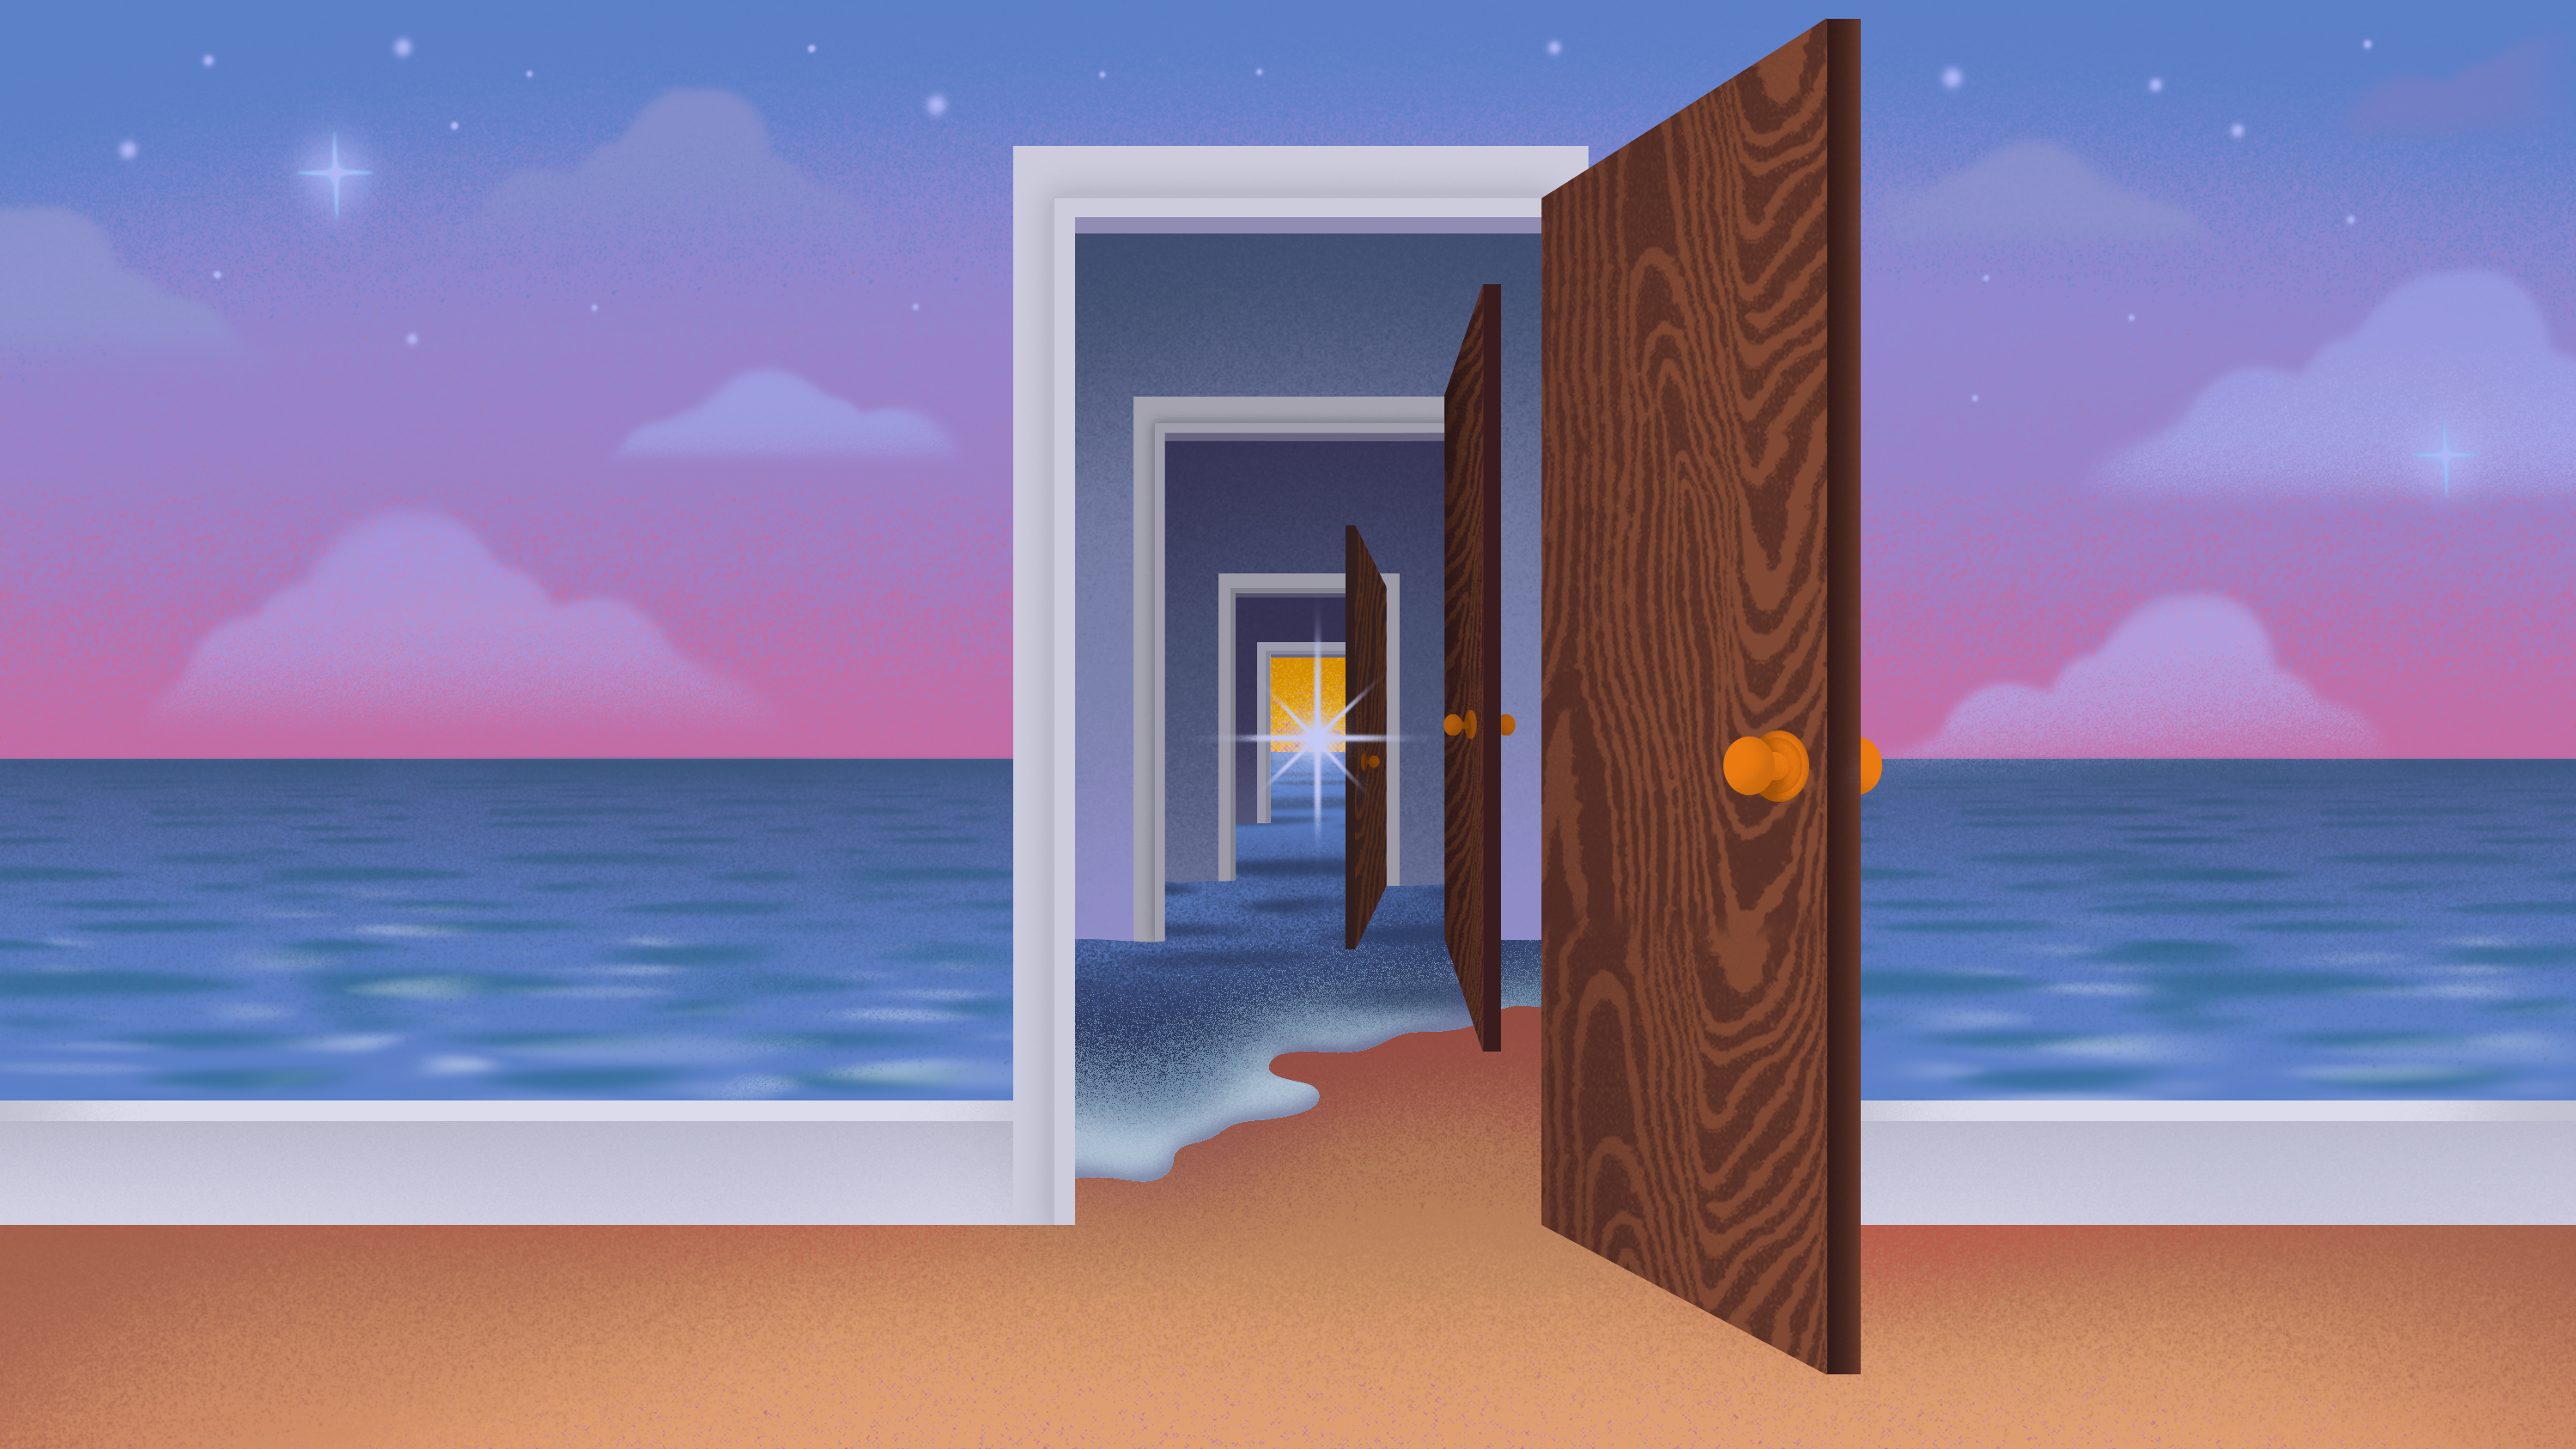 a series of open doors leading to a bright light with the wallpaper showing a twilight view over the ocean